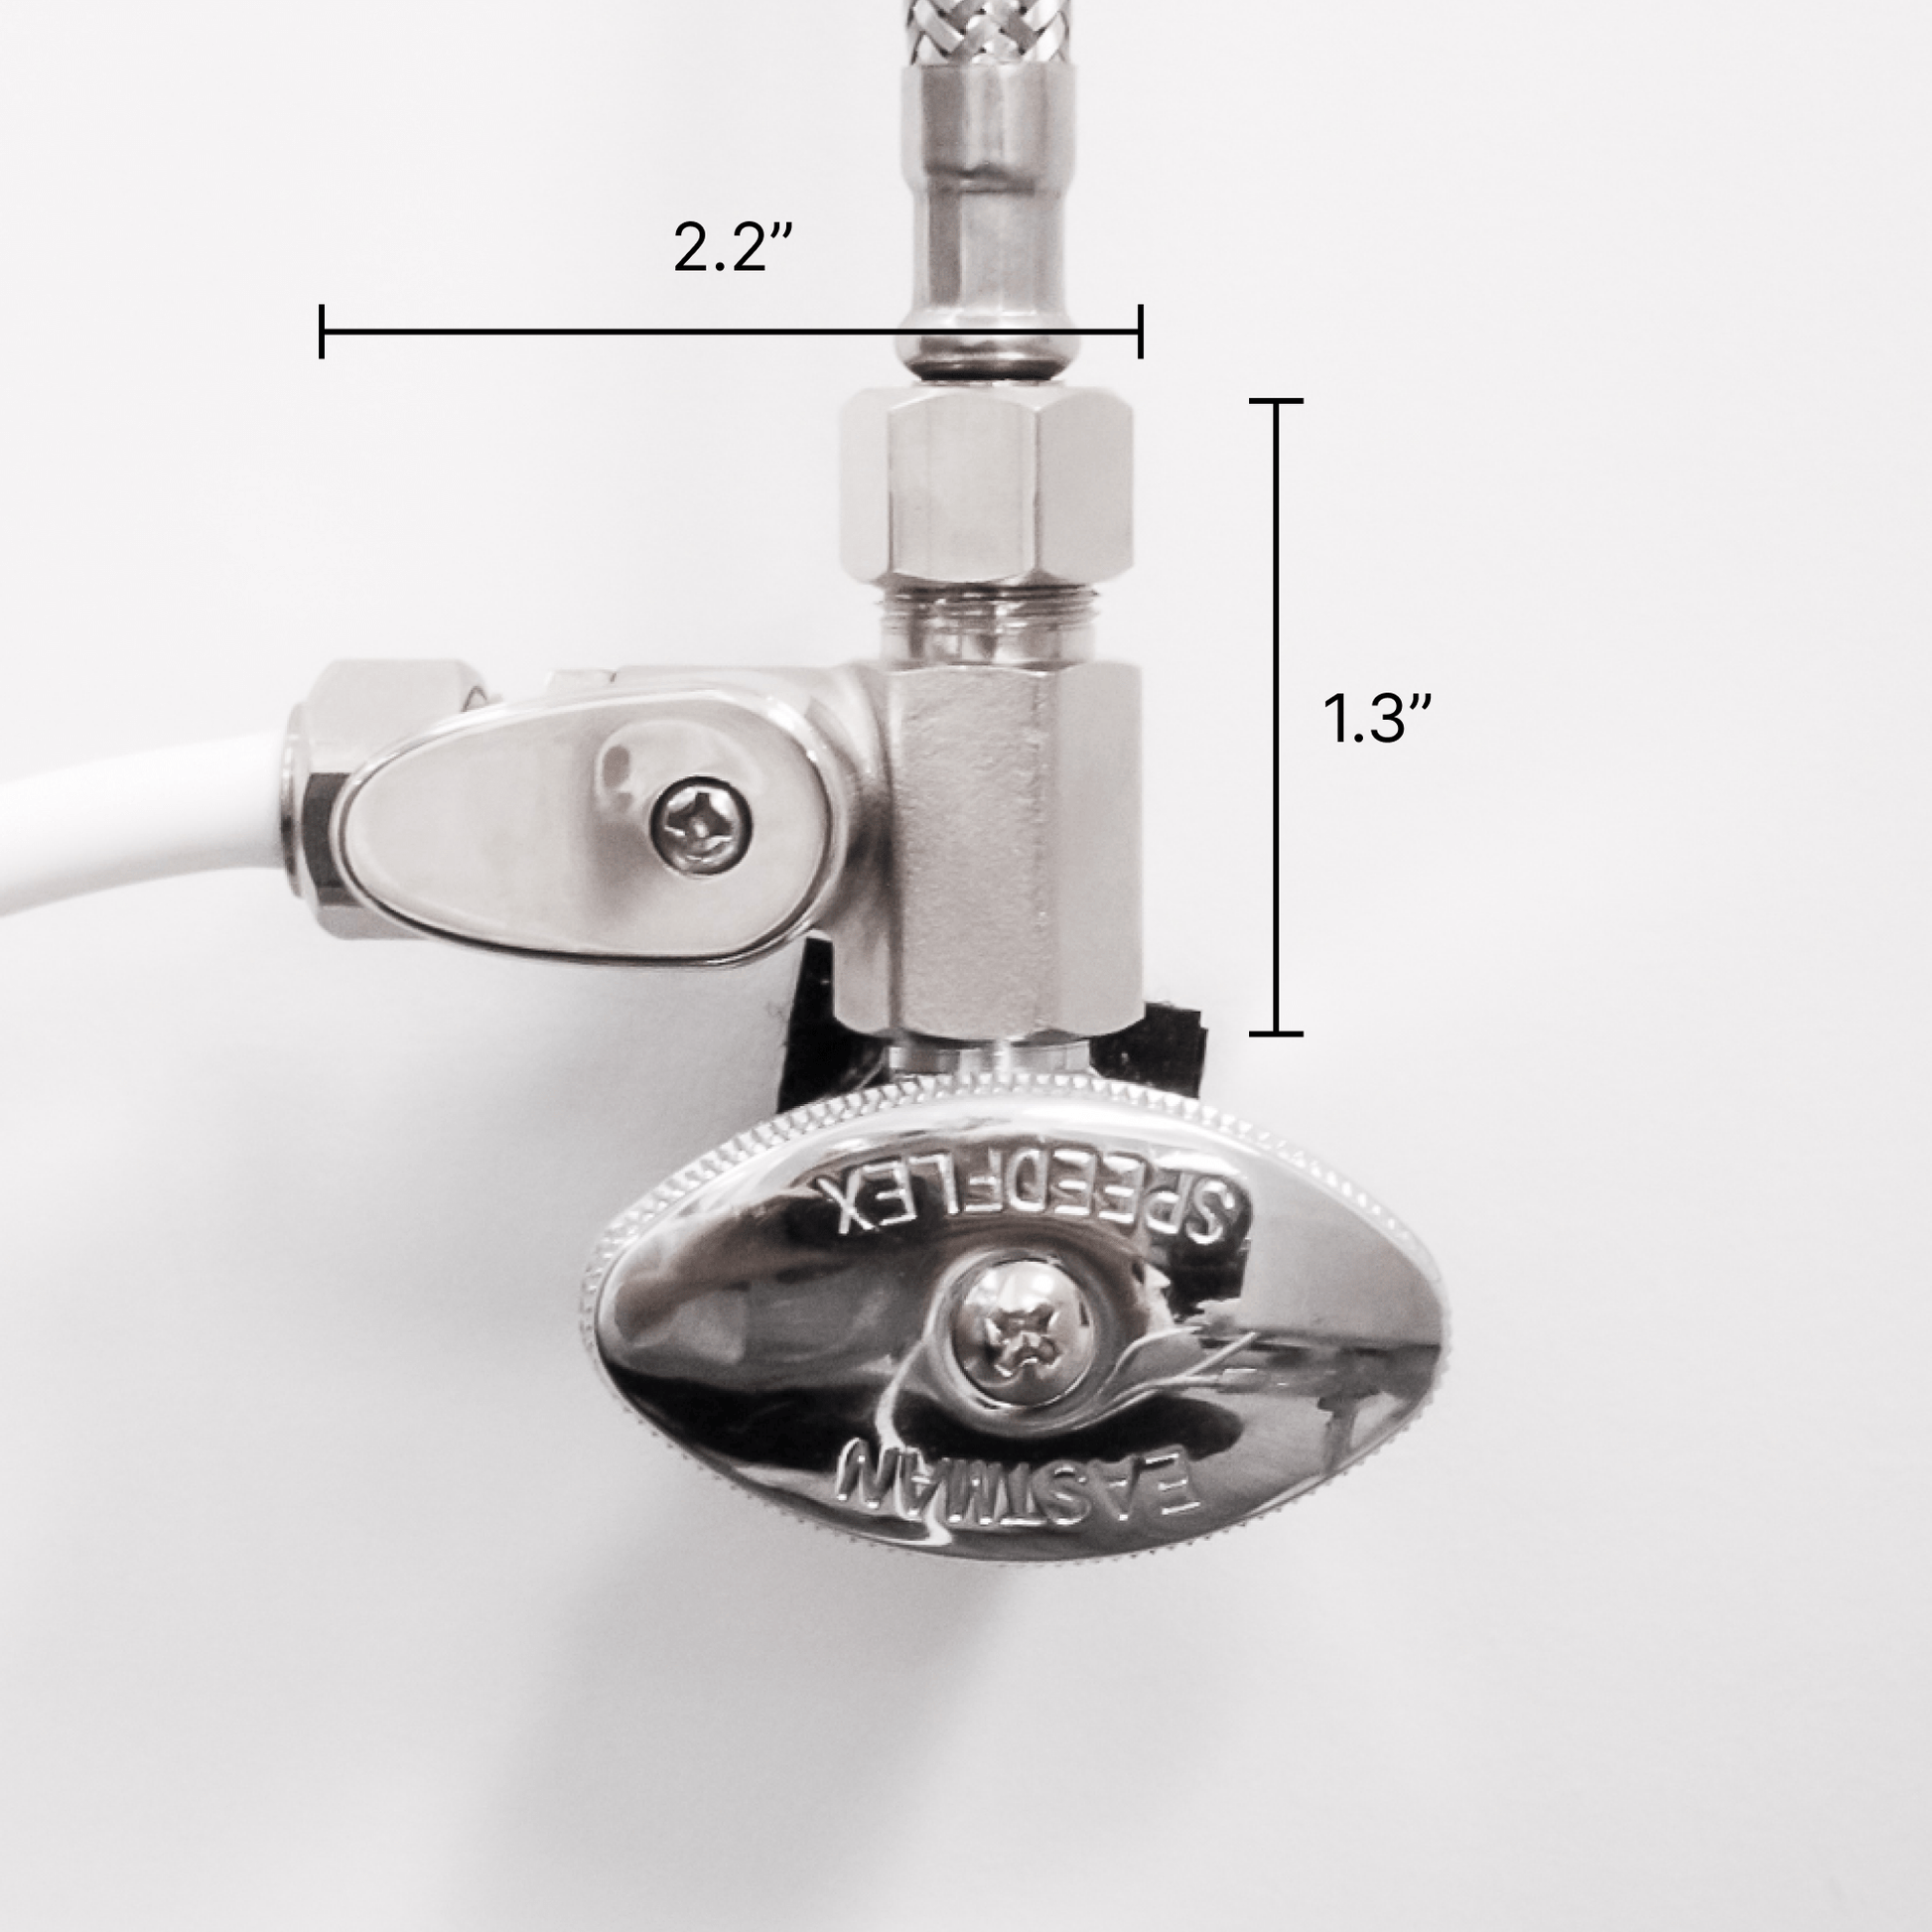 Hot Water Teardrop Nickel Shut-Off T-Adapter in off position. Length: 2.2 inches, Height: 1.3 inches